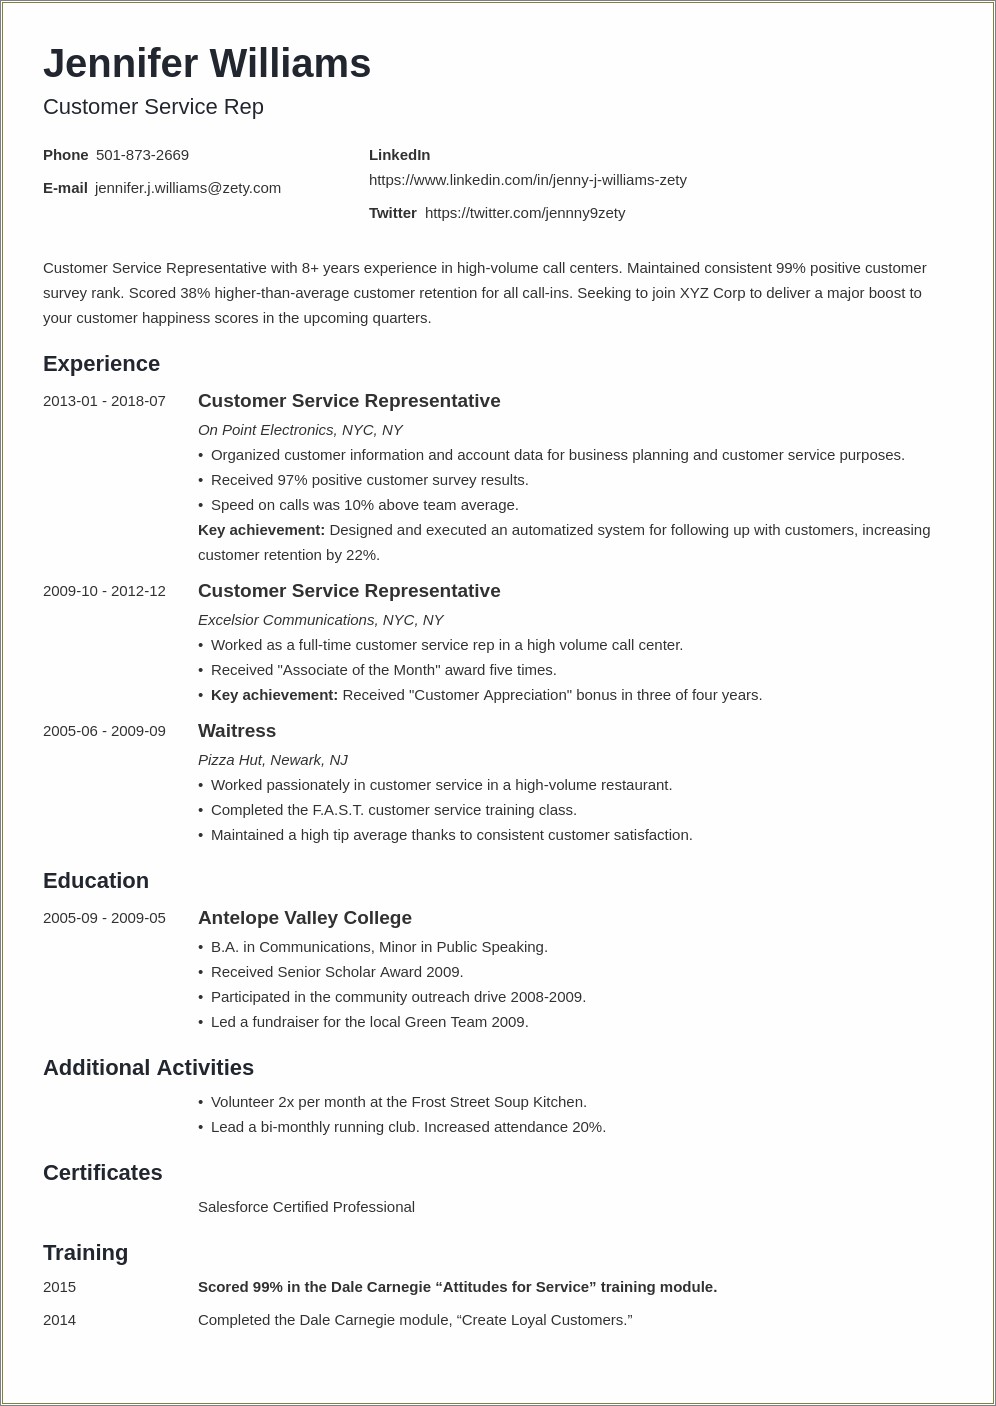 Acceptable Applications You Should Put On A Resume